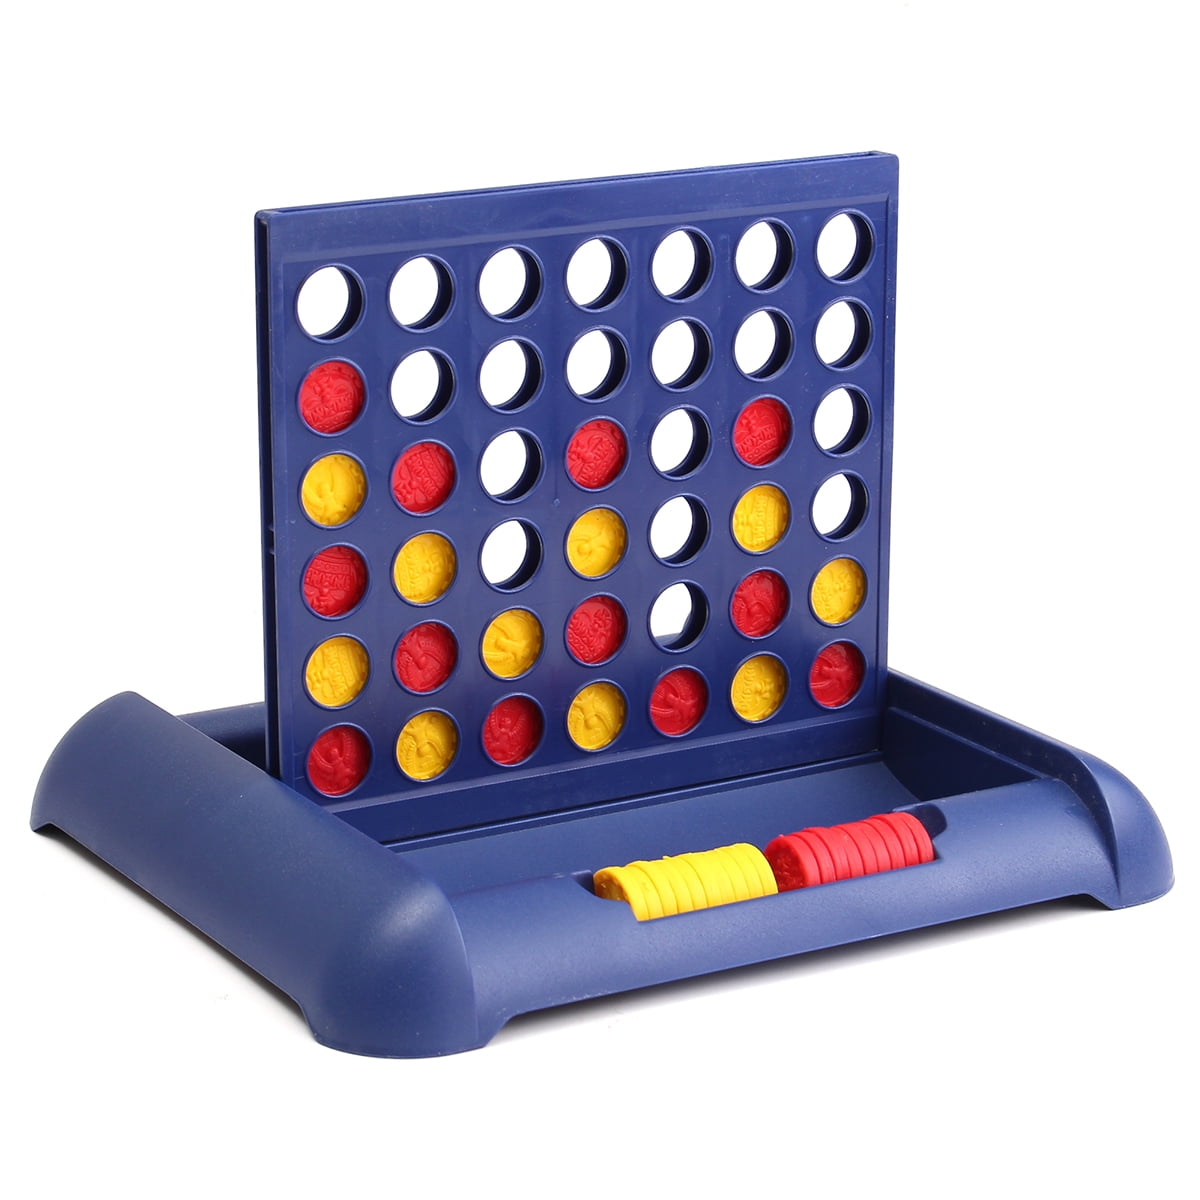 NEW CONNECT FOUR JOIN 4 IN A ROW BOARD GAME FAMILY FUN CHILDREN KIDS PARTY GAME 